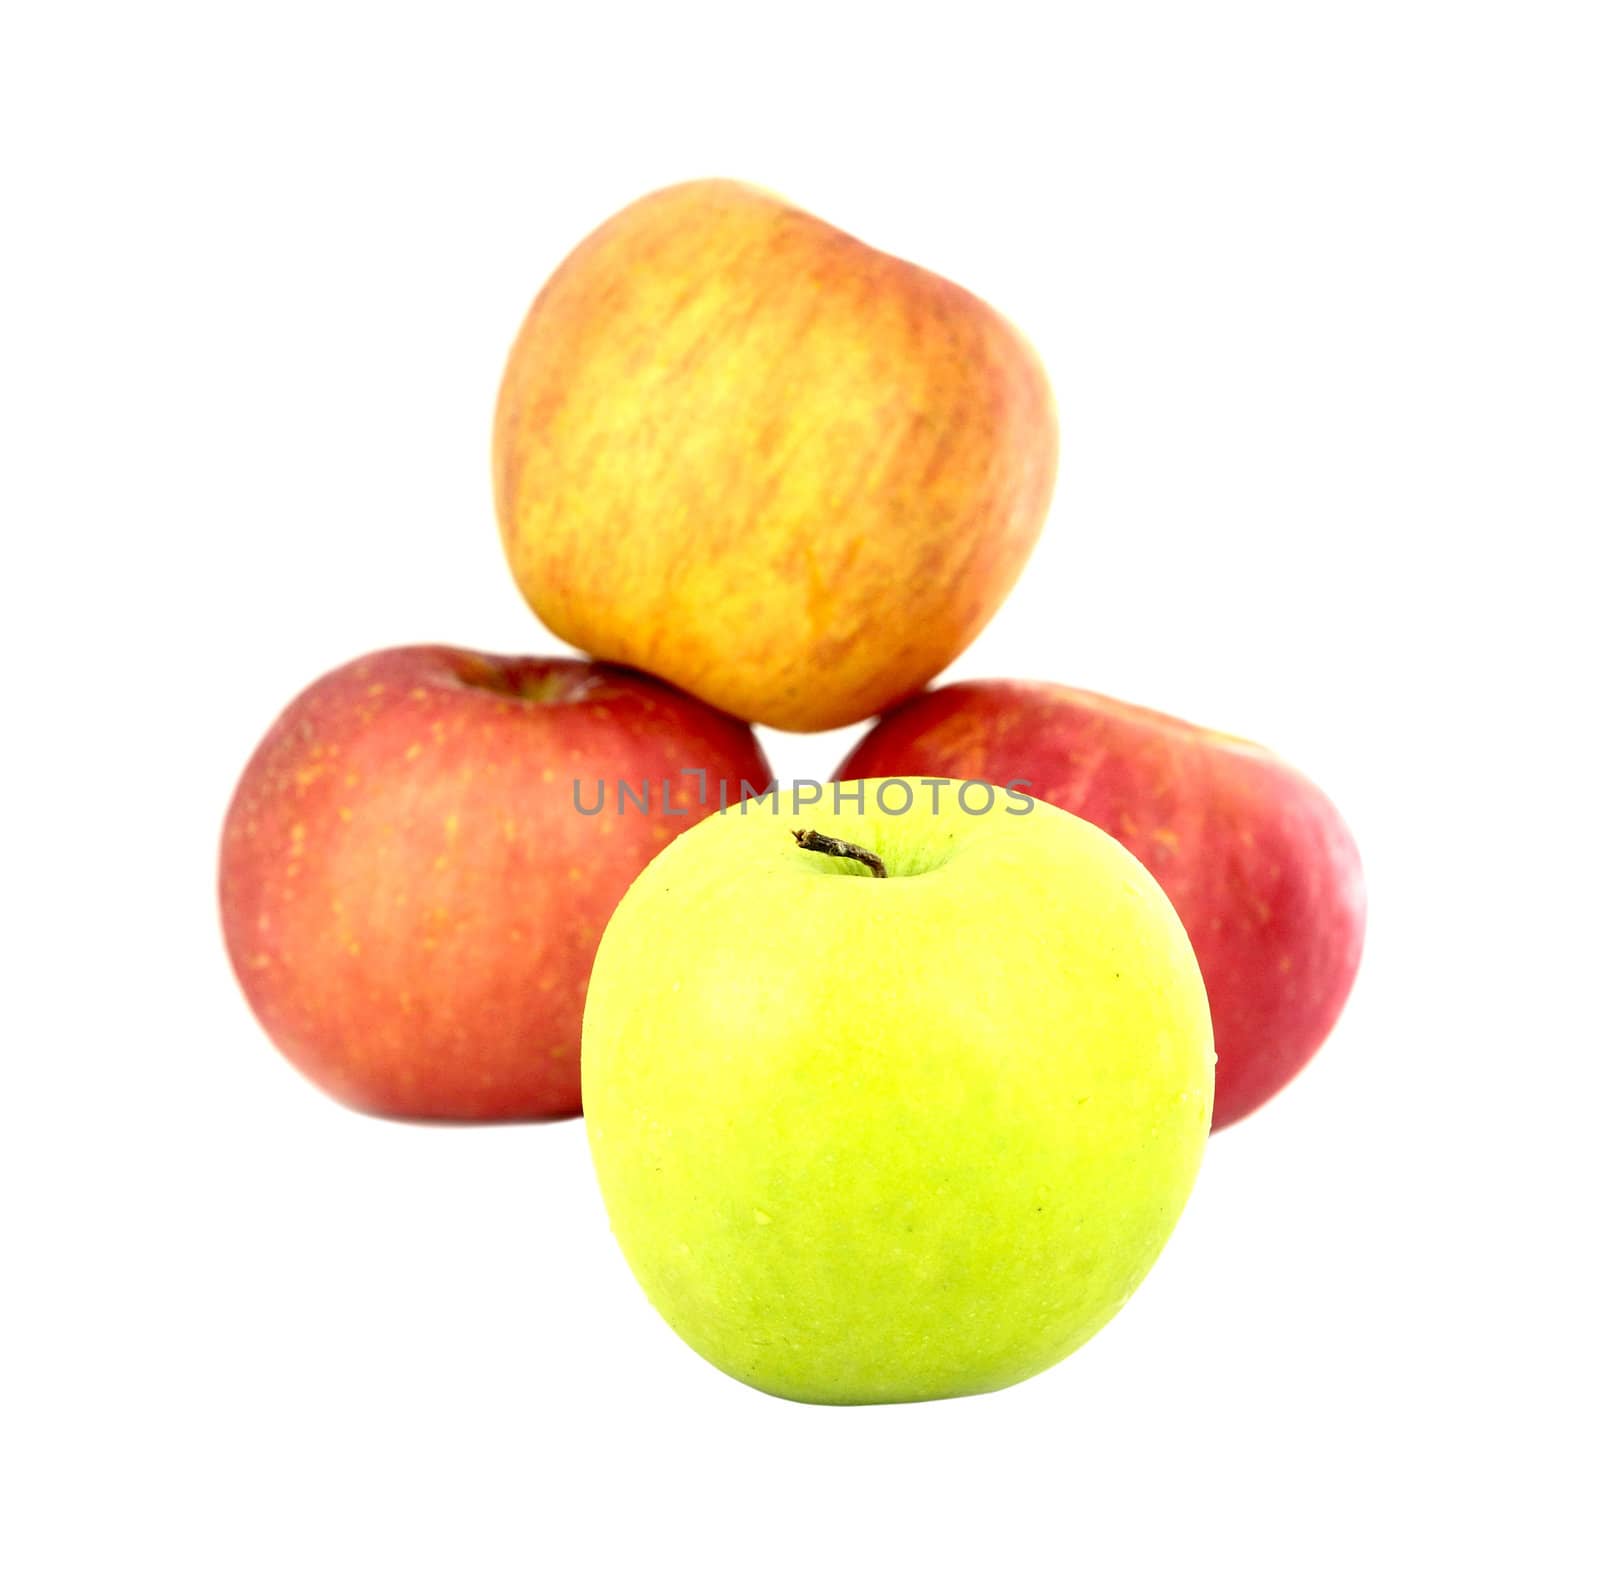 green and red apples on white background by geargodz